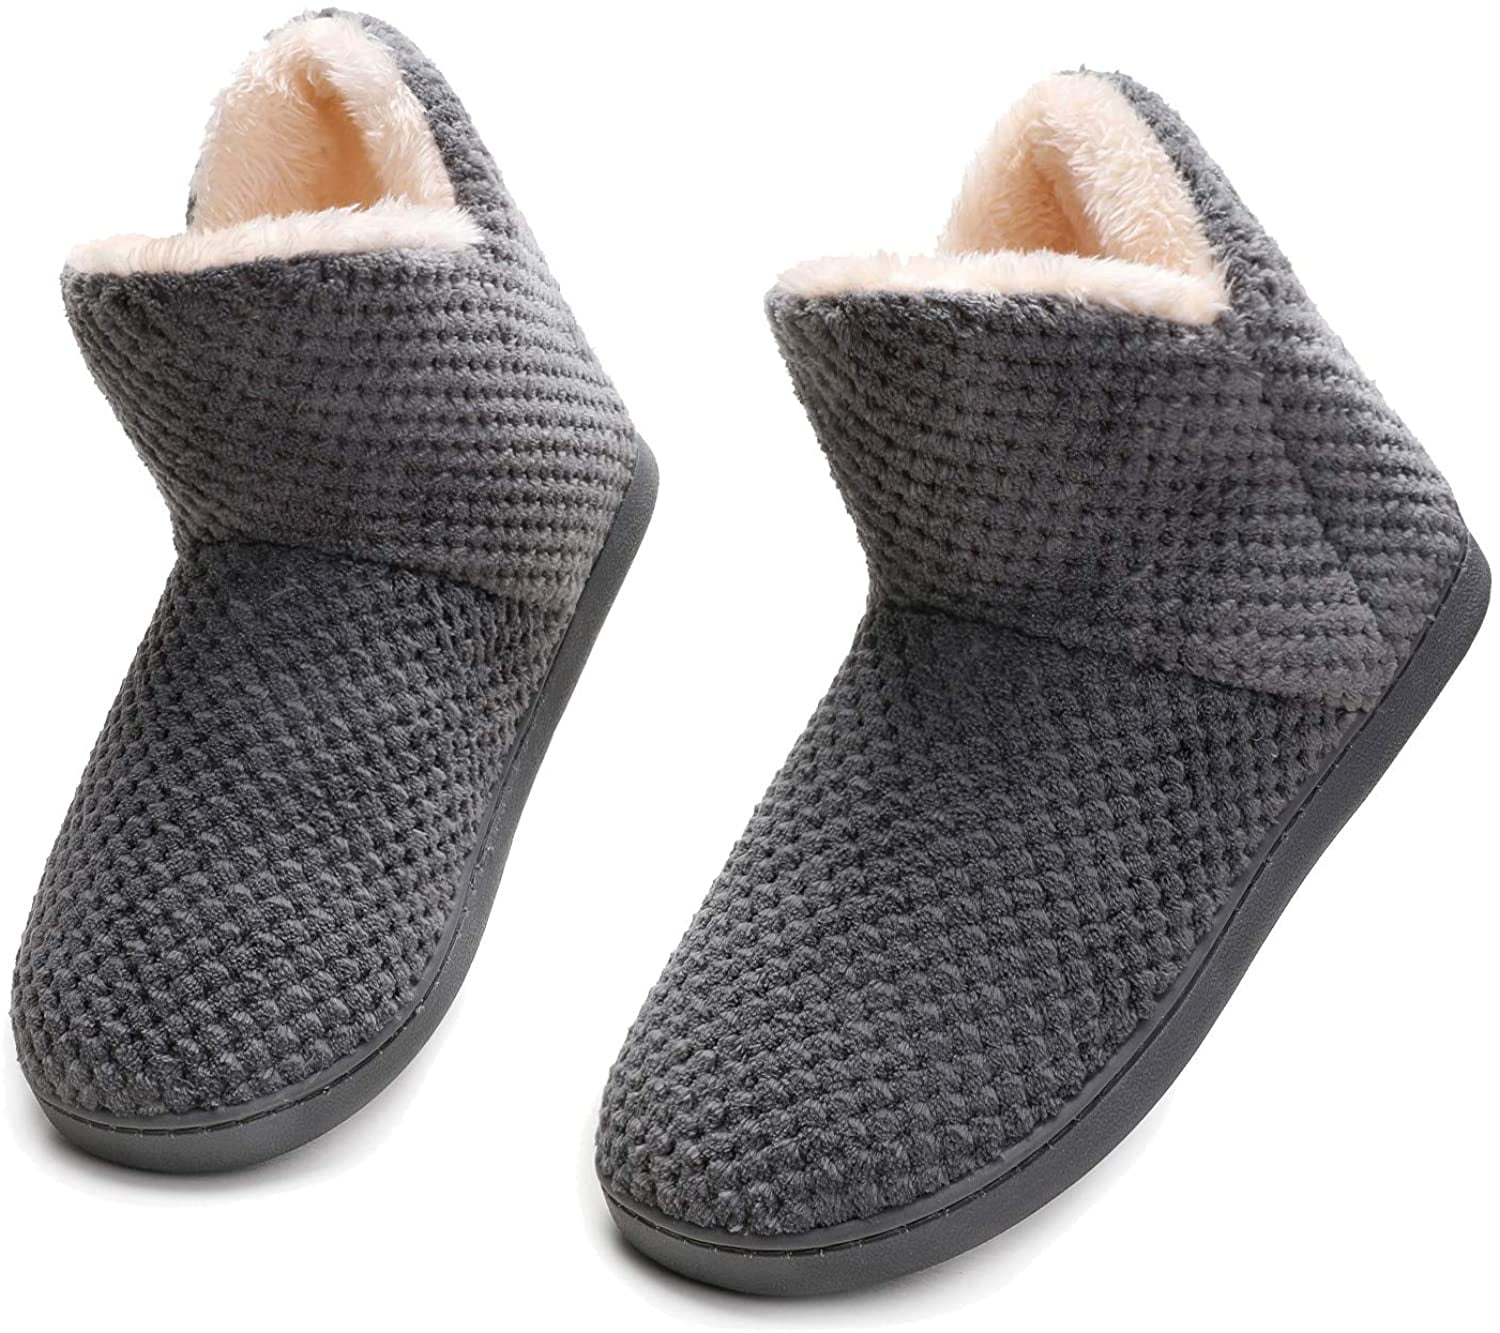 women's Furry Bootie Slippers Comfywarm House Slipperswith Plush Faux ...